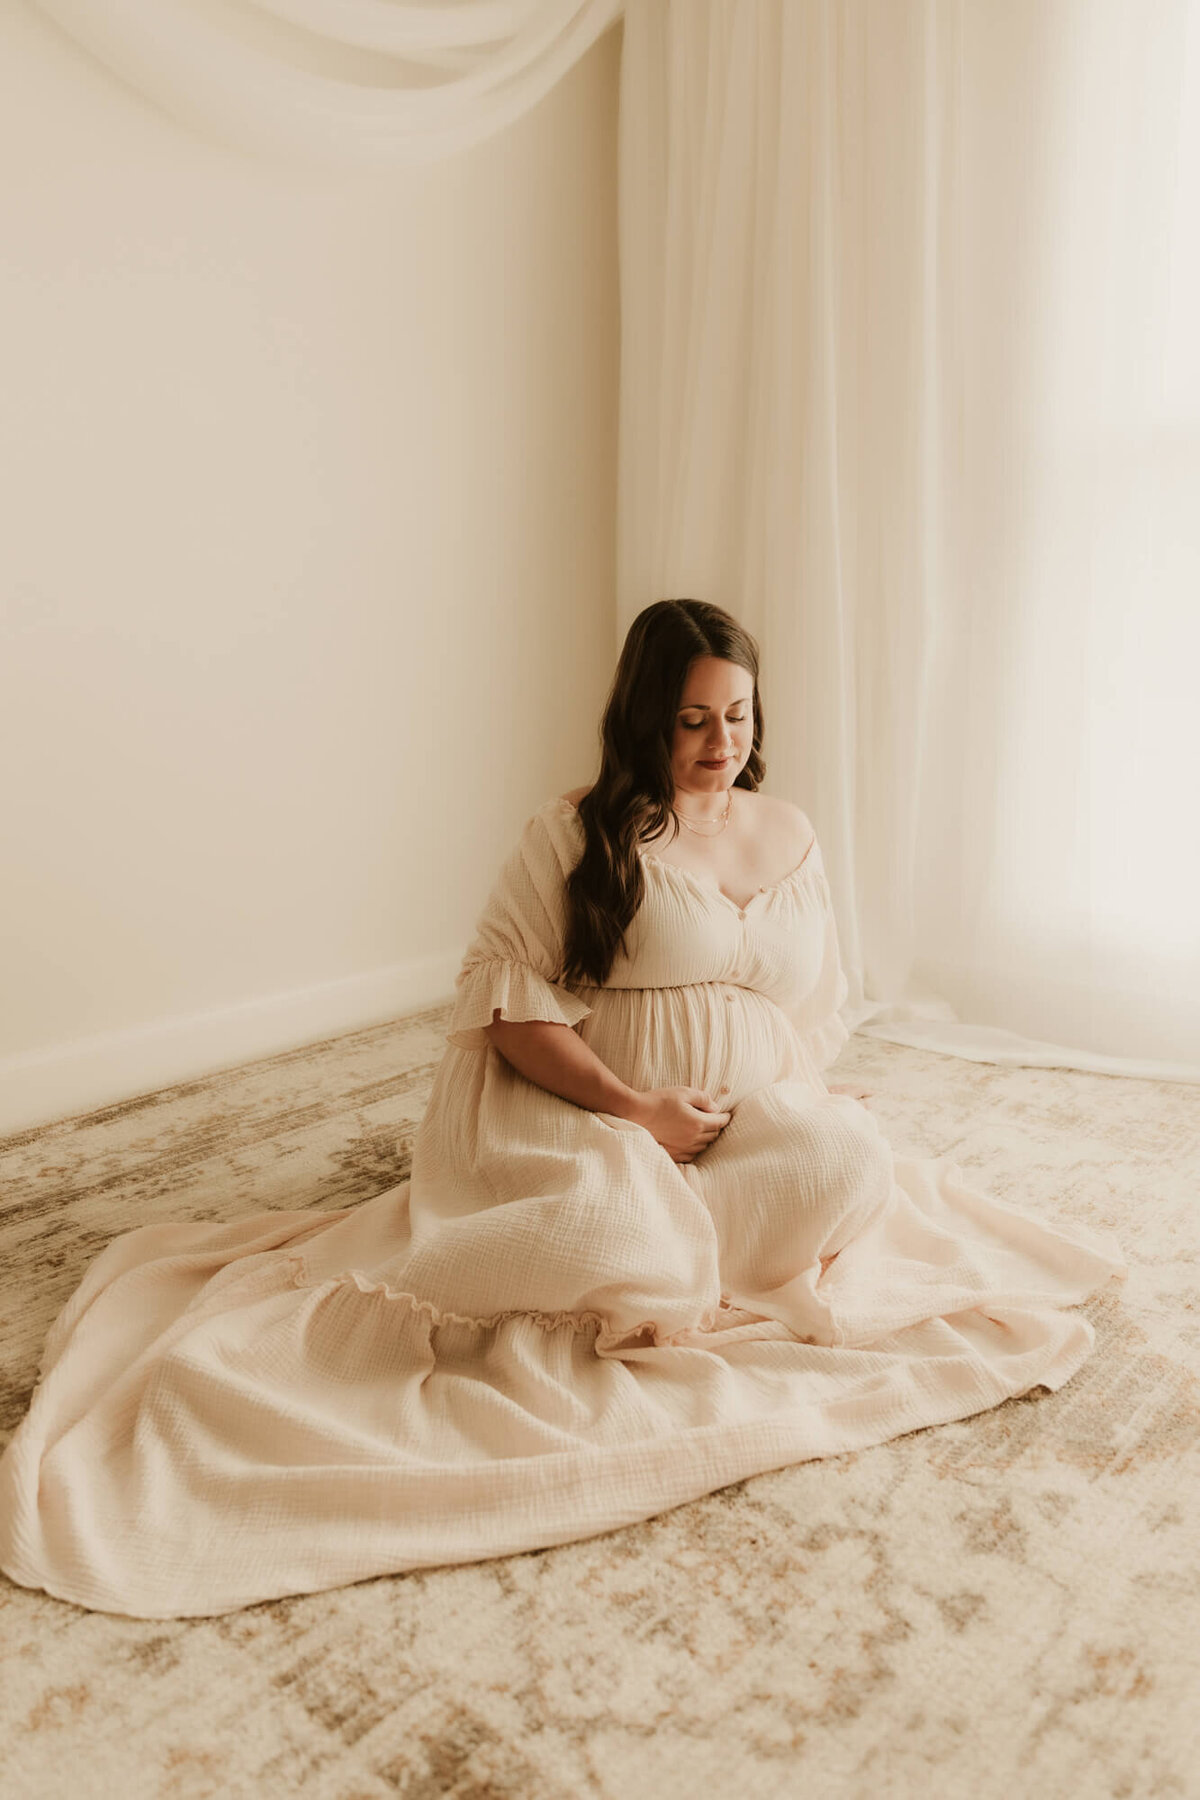 Mother looks at her baby bump while sitting down on a rug and holding her belly.